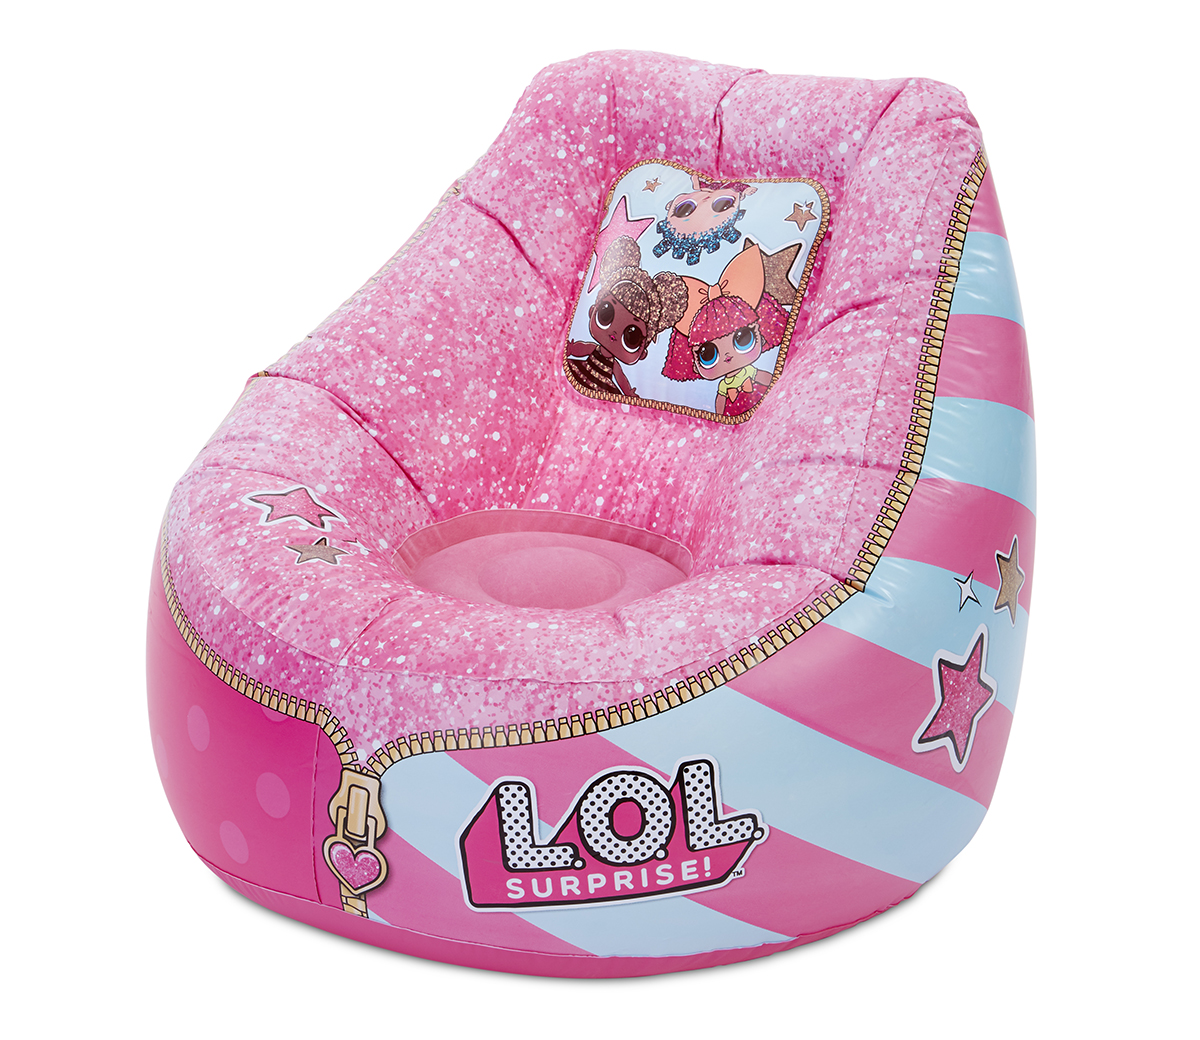 L.O.L. Surprise! Chill Out Inflatable 